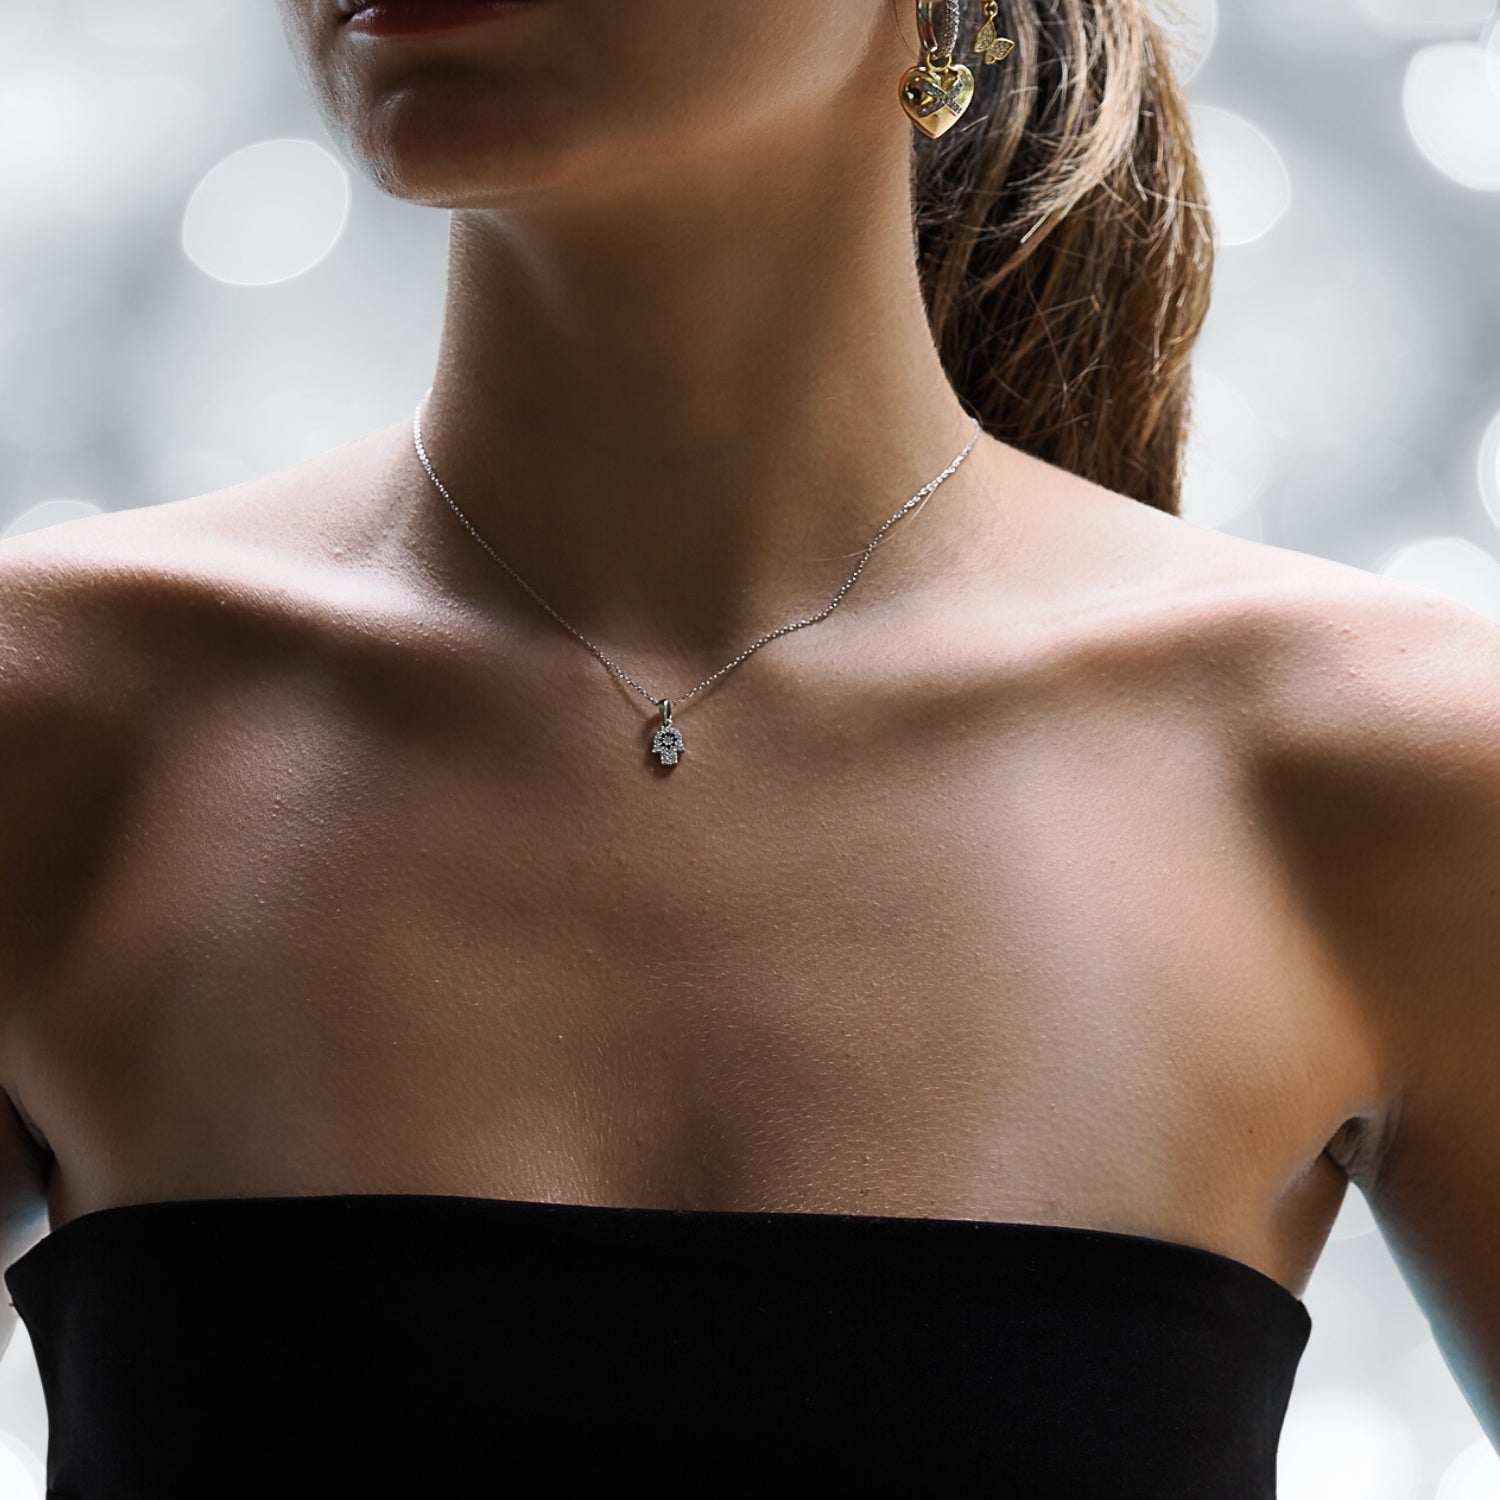 Model Wearing a Sterling Silver Hamsa Hand Necklace - A Symbol of Protection.